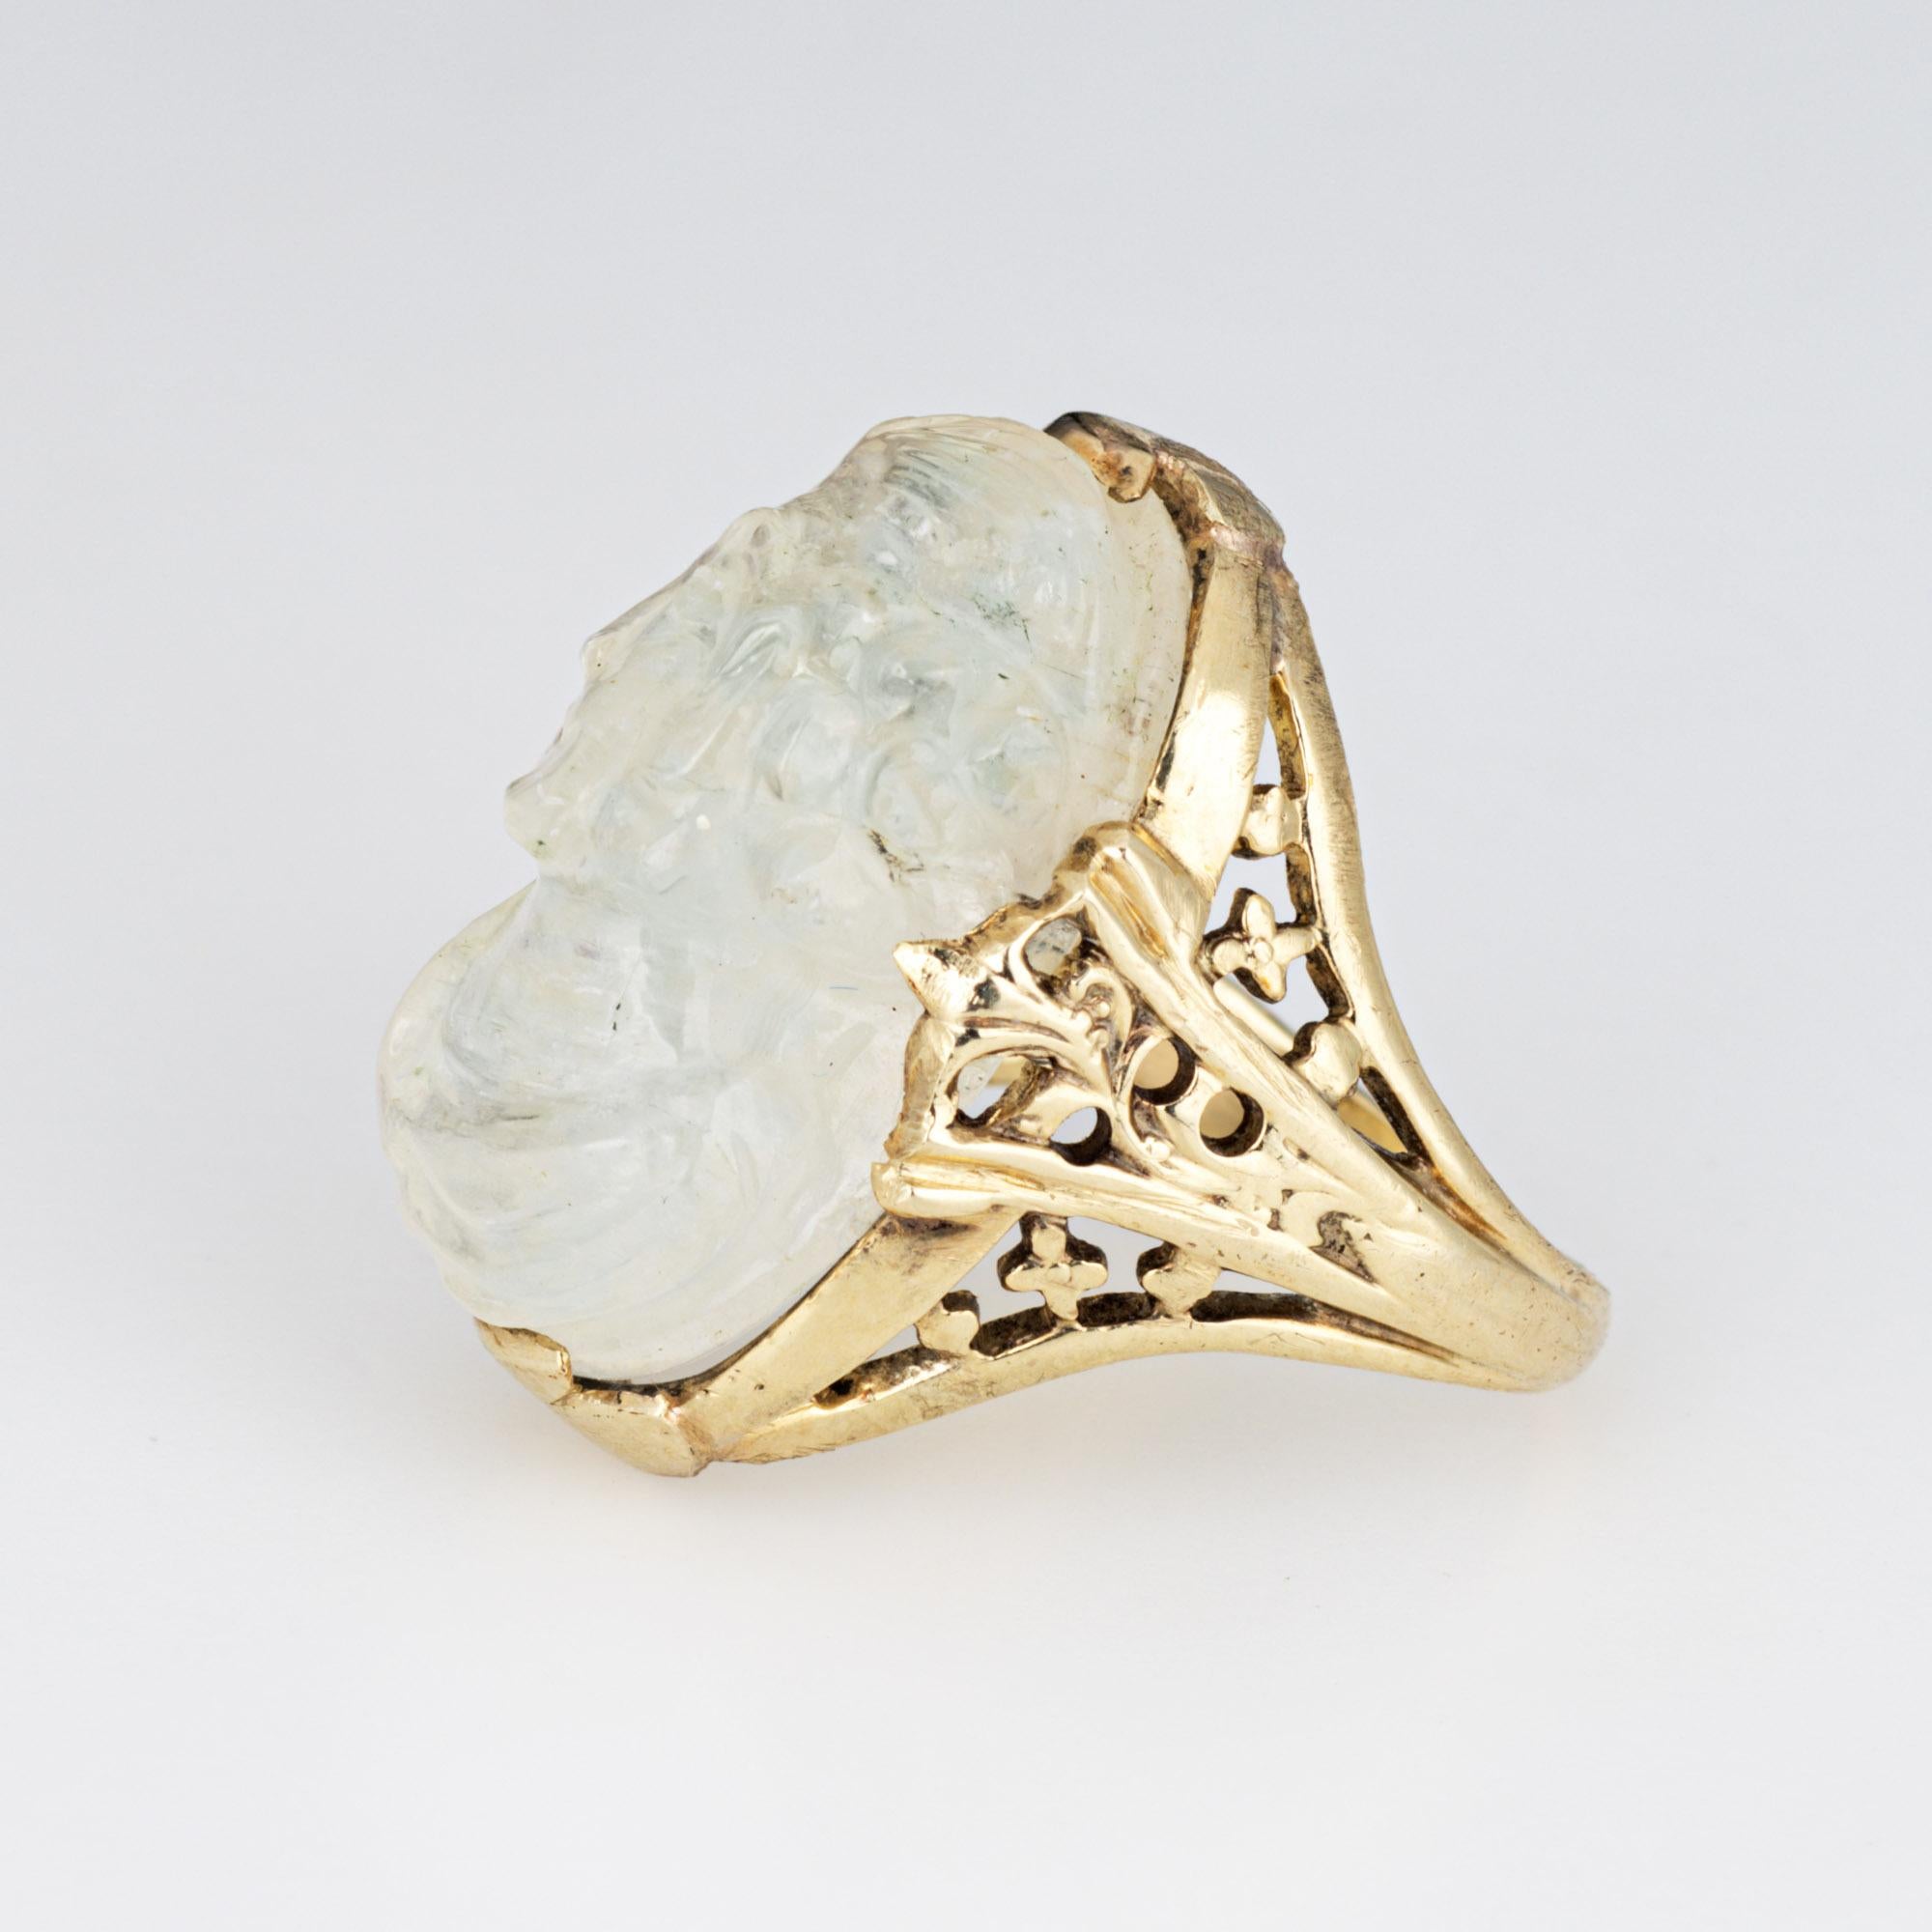 Vintage Art Deco Carved Moonstone Cameo Ring 14k Yellow Gold Sz 5 Fine Jewelry In Good Condition For Sale In Torrance, CA